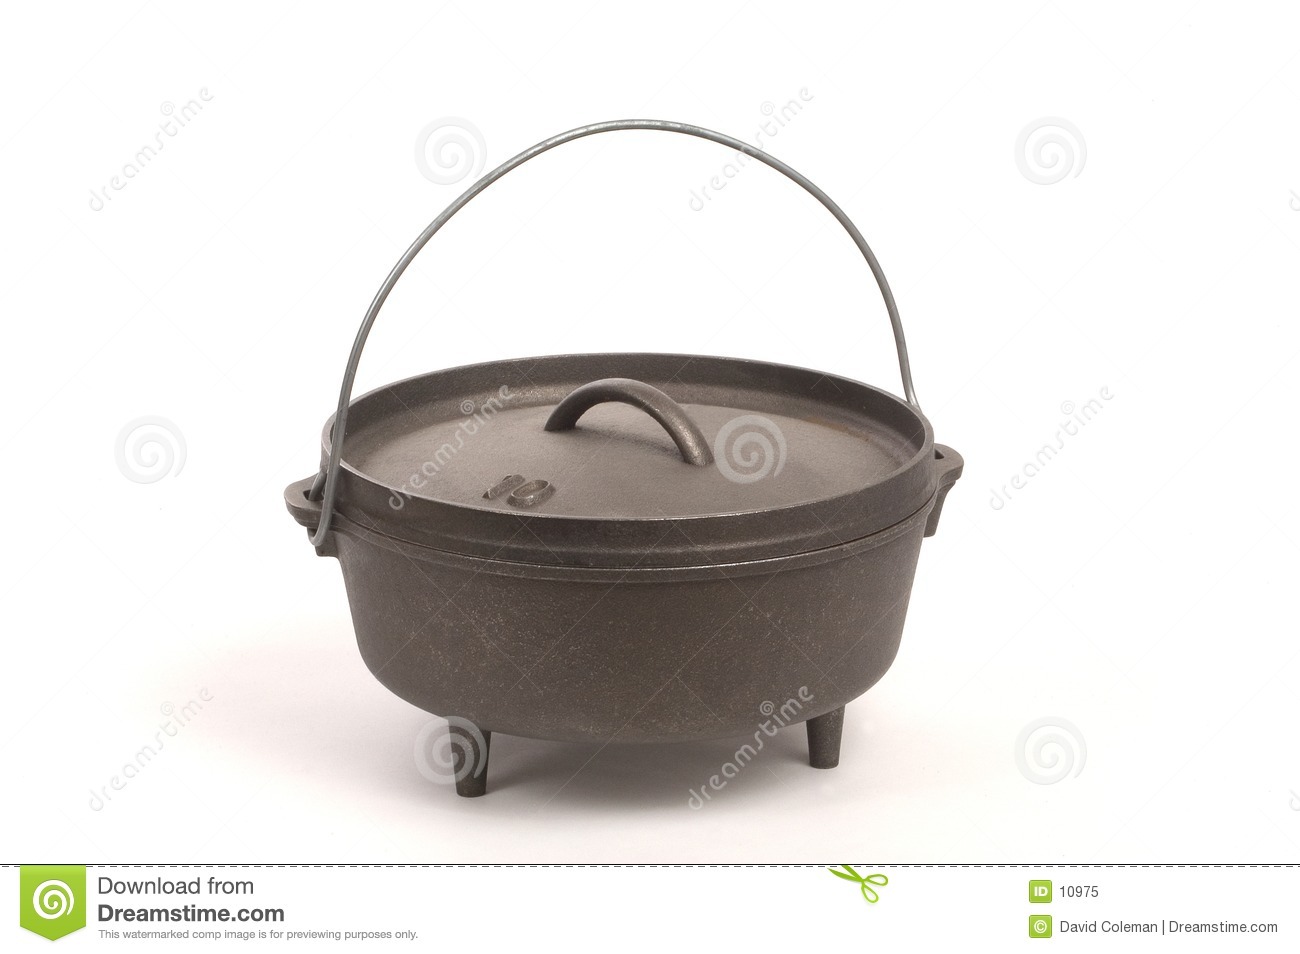 View Of A Dutch Oven With Lid In Place Oven Is Made Of Cast Iron And